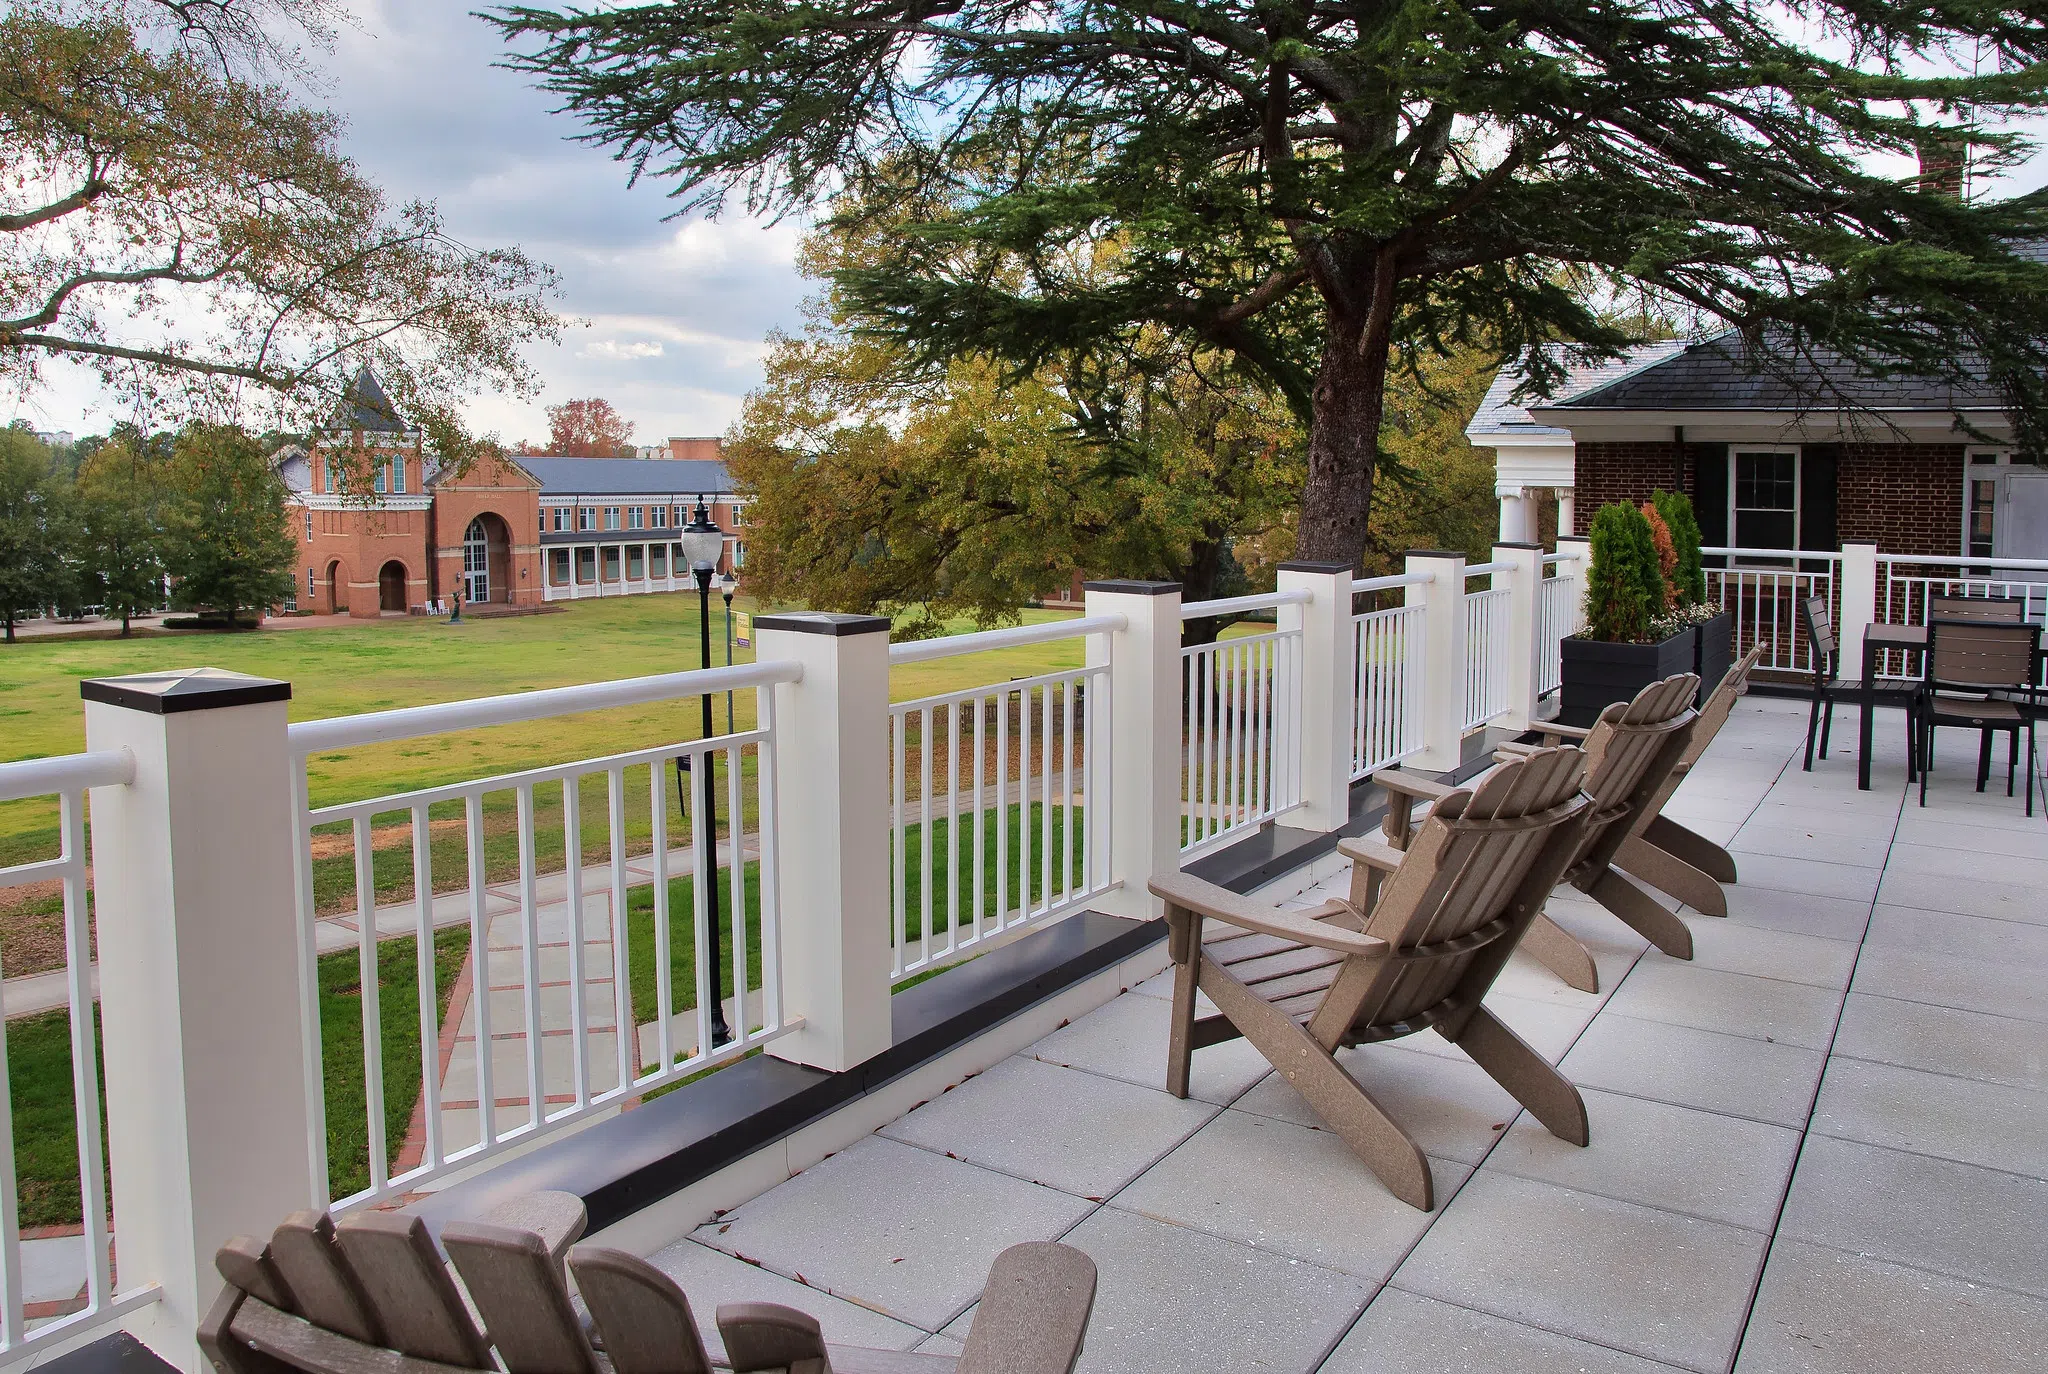 Adirondack chairs on an open patio overlook the large, grassy quad.